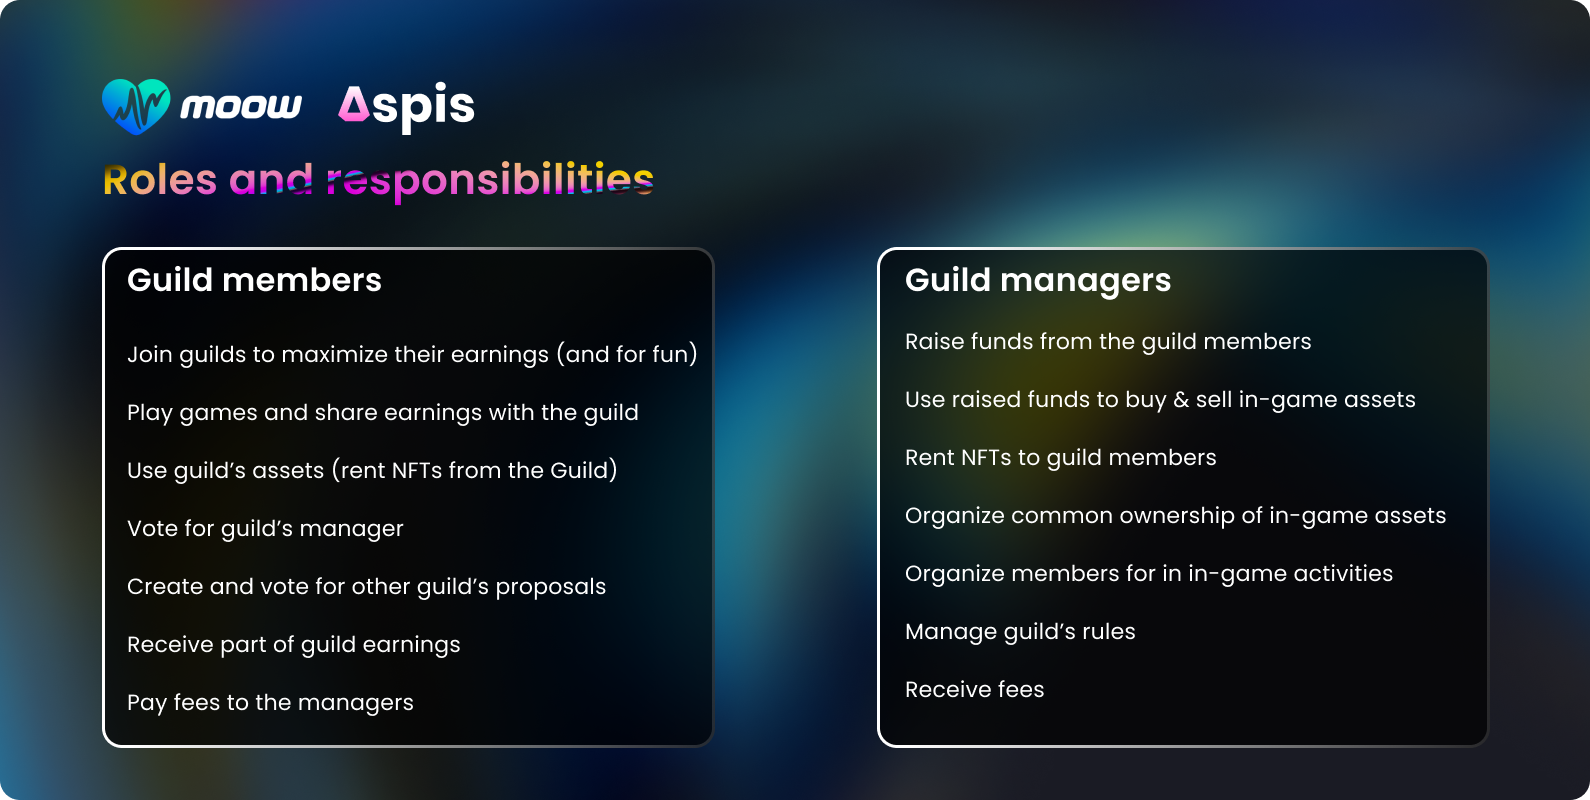 Roles and responsibilities in the MooW guilds built on ASPIS